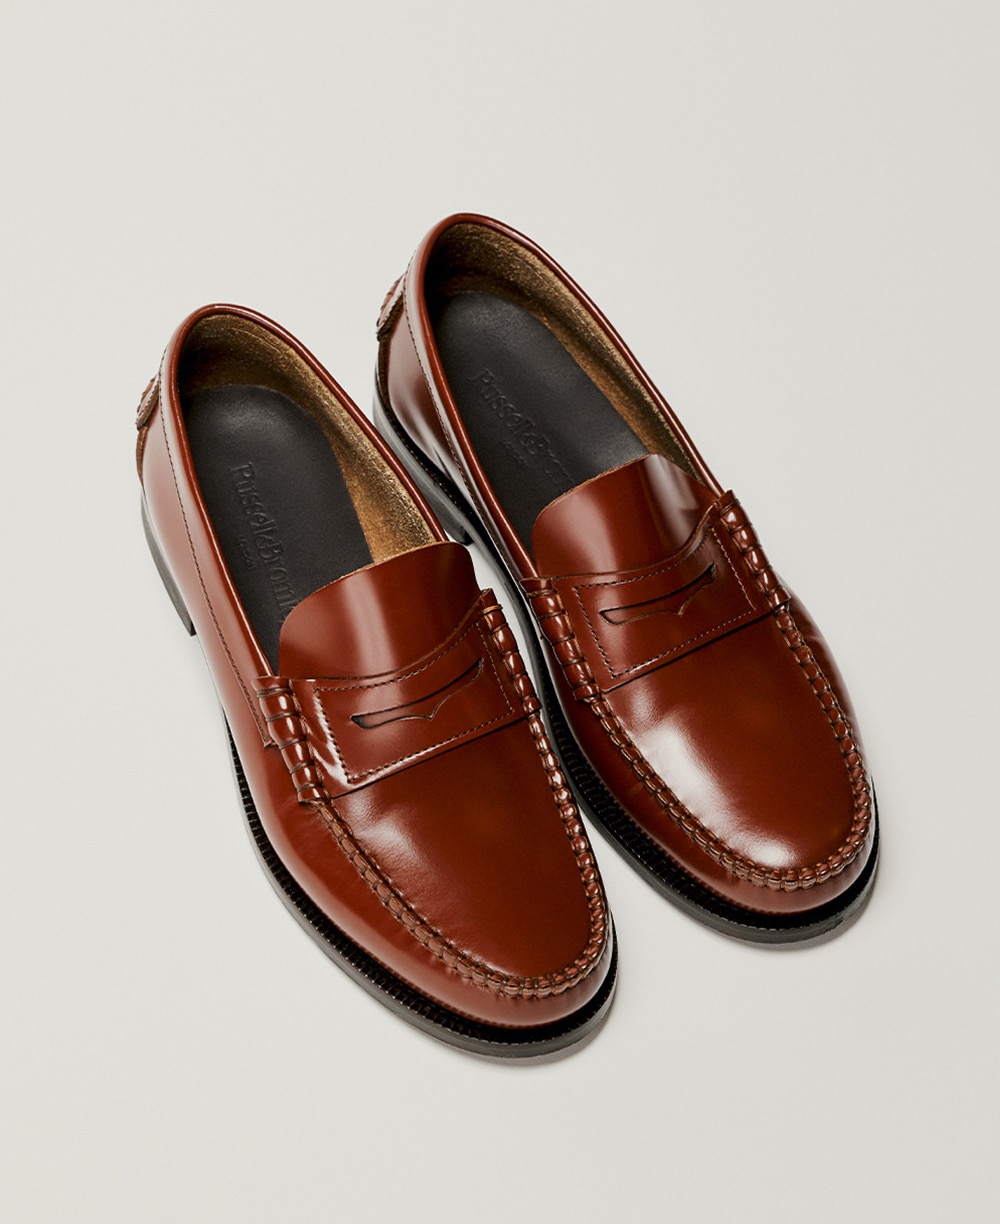 Dartmouth - Moccasin Saddle Loafer in tan